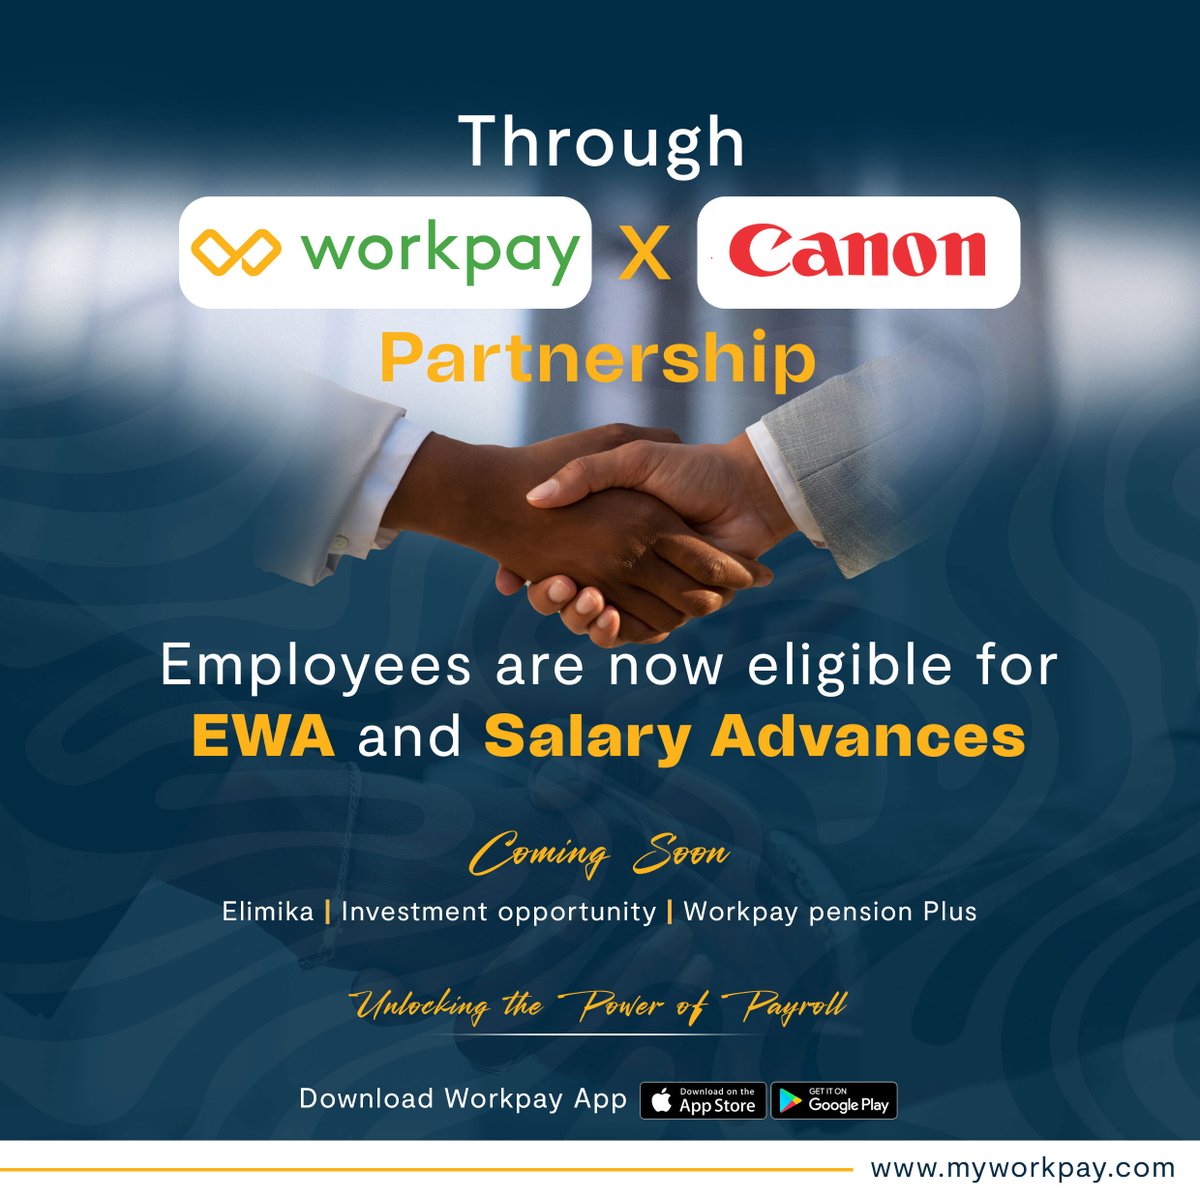 🎉 Big news! Workpay has partnered with @CanonCNA to offer you financial services like Earned Wage Access (EWA) and Salary Advances. 💼📸 Enjoy financial flexibility while capturing perfect moments. We've got your back! #Workpay #Canon #FinancialServices #EWA #SalaryAdvance